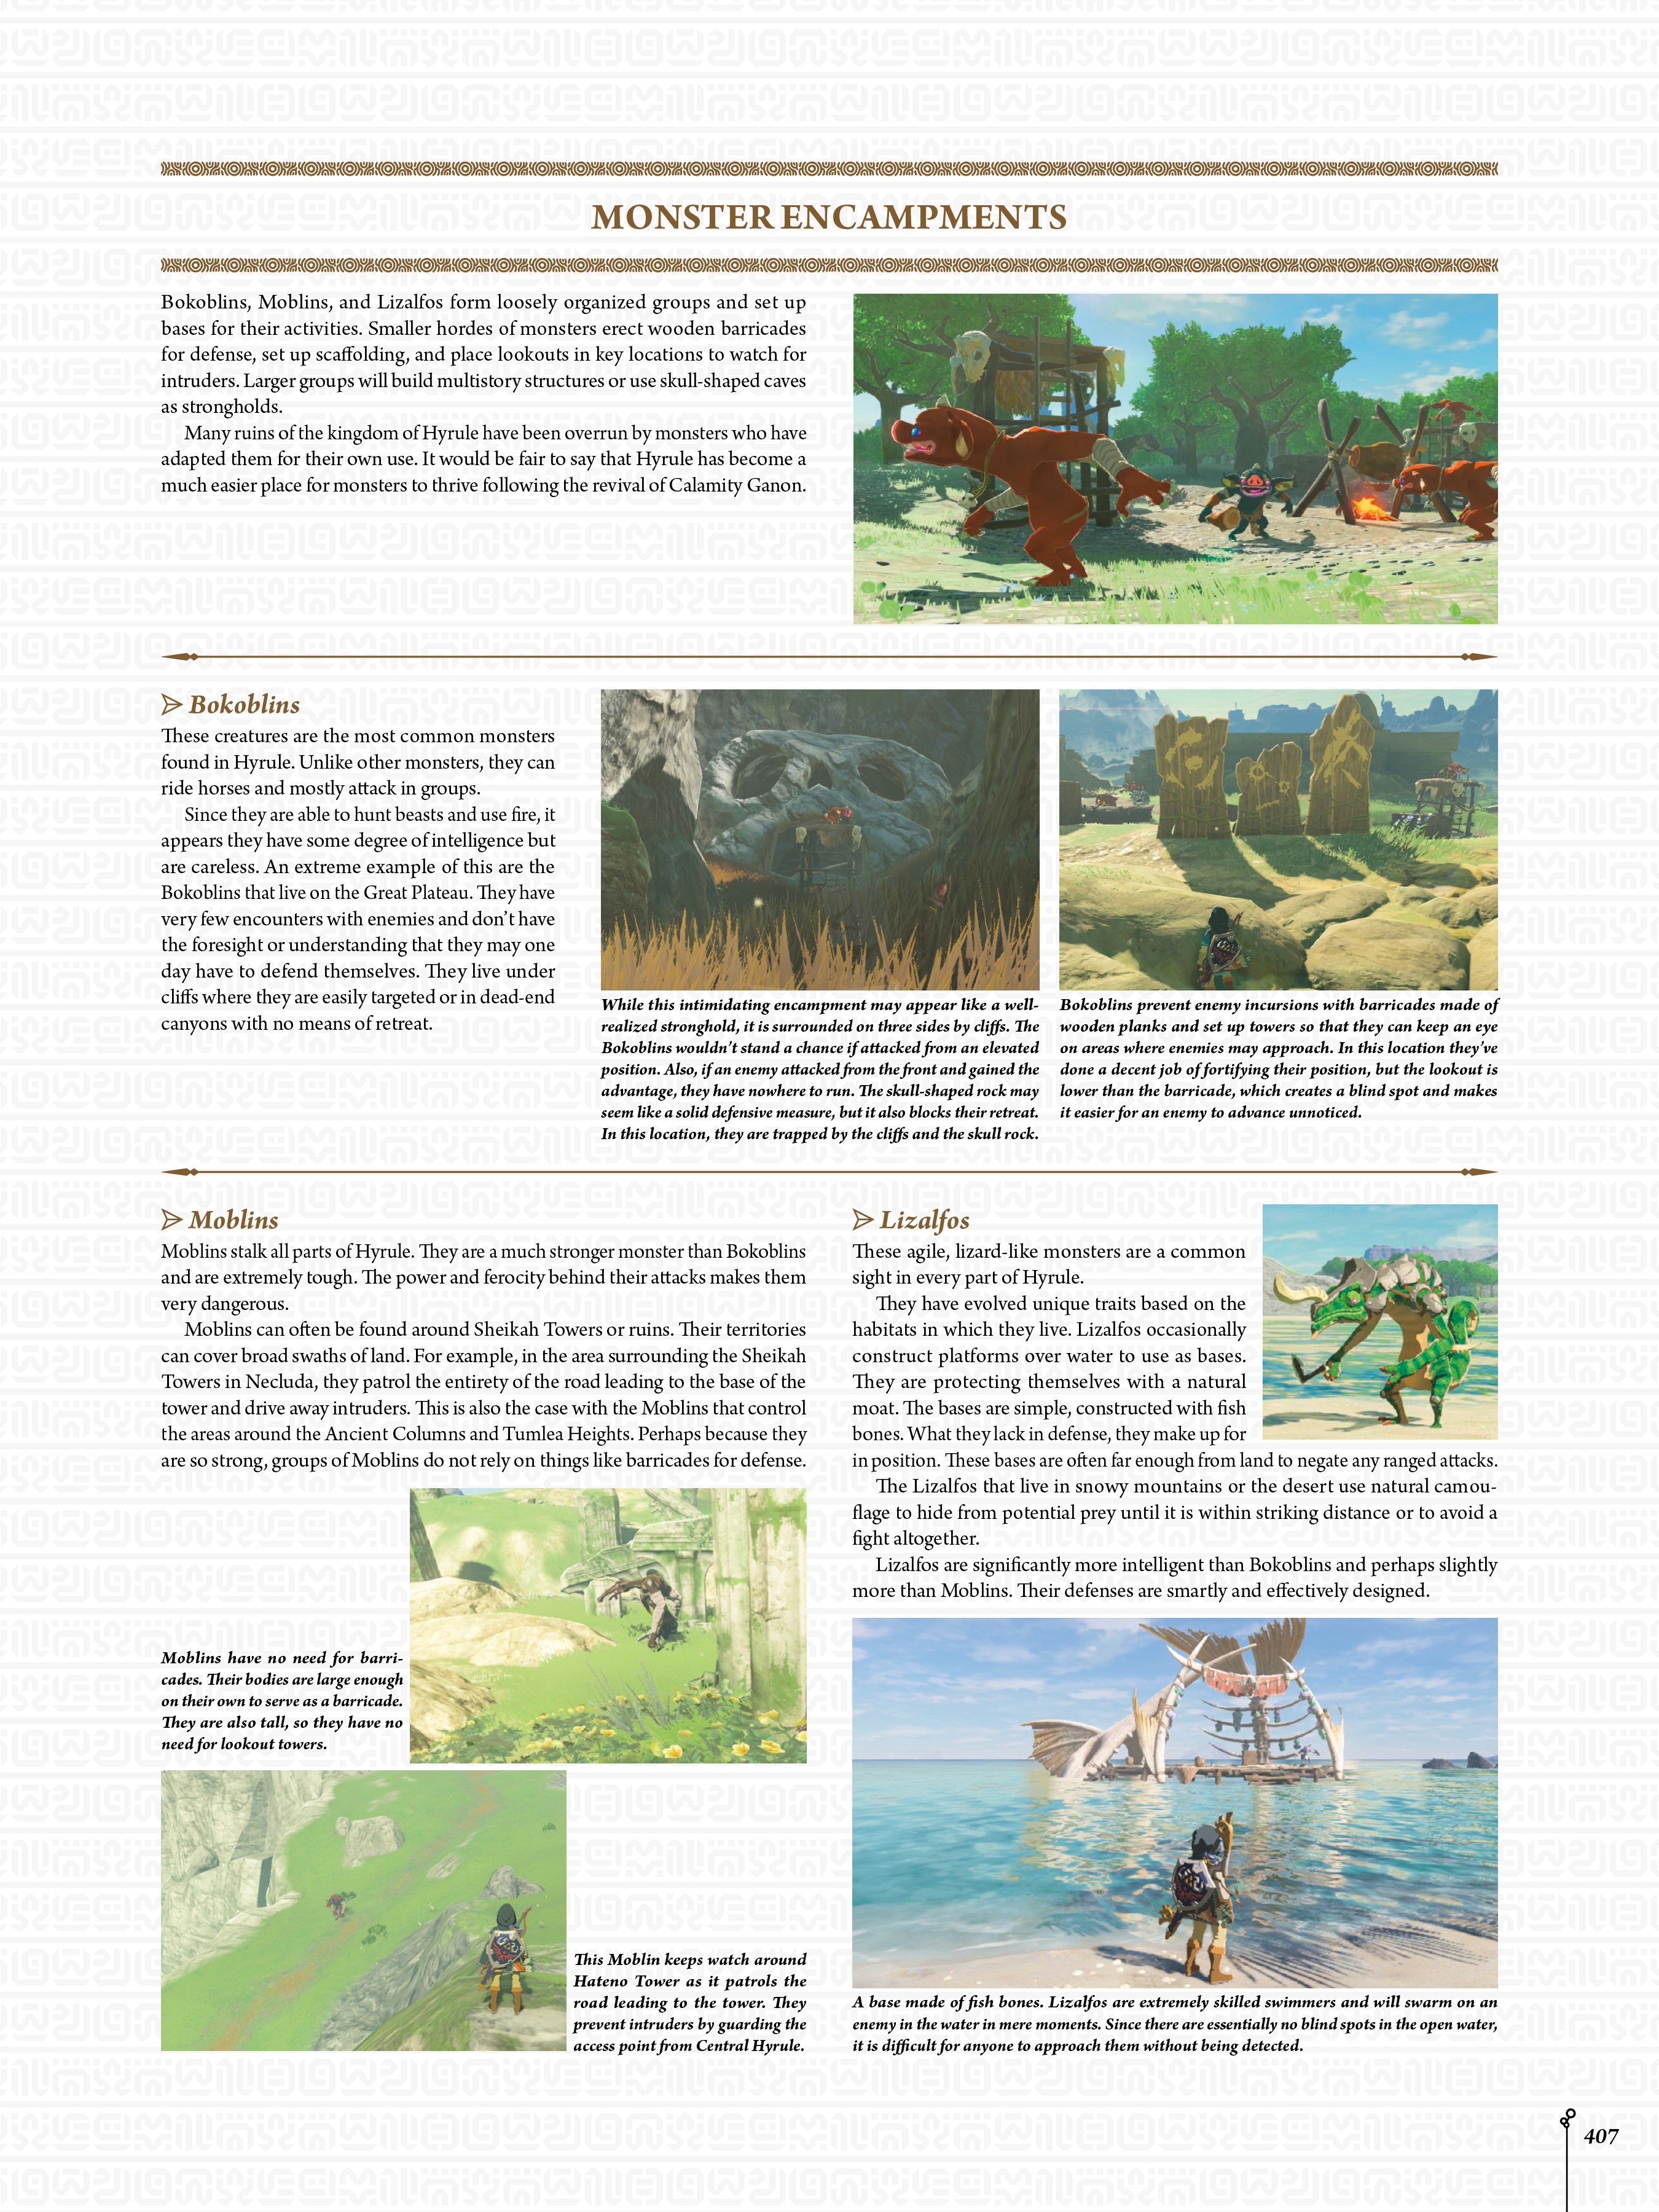 Read online The Legend of Zelda: Breath of the Wild–Creating A Champion comic -  Issue # TPB (Part 4) - 46